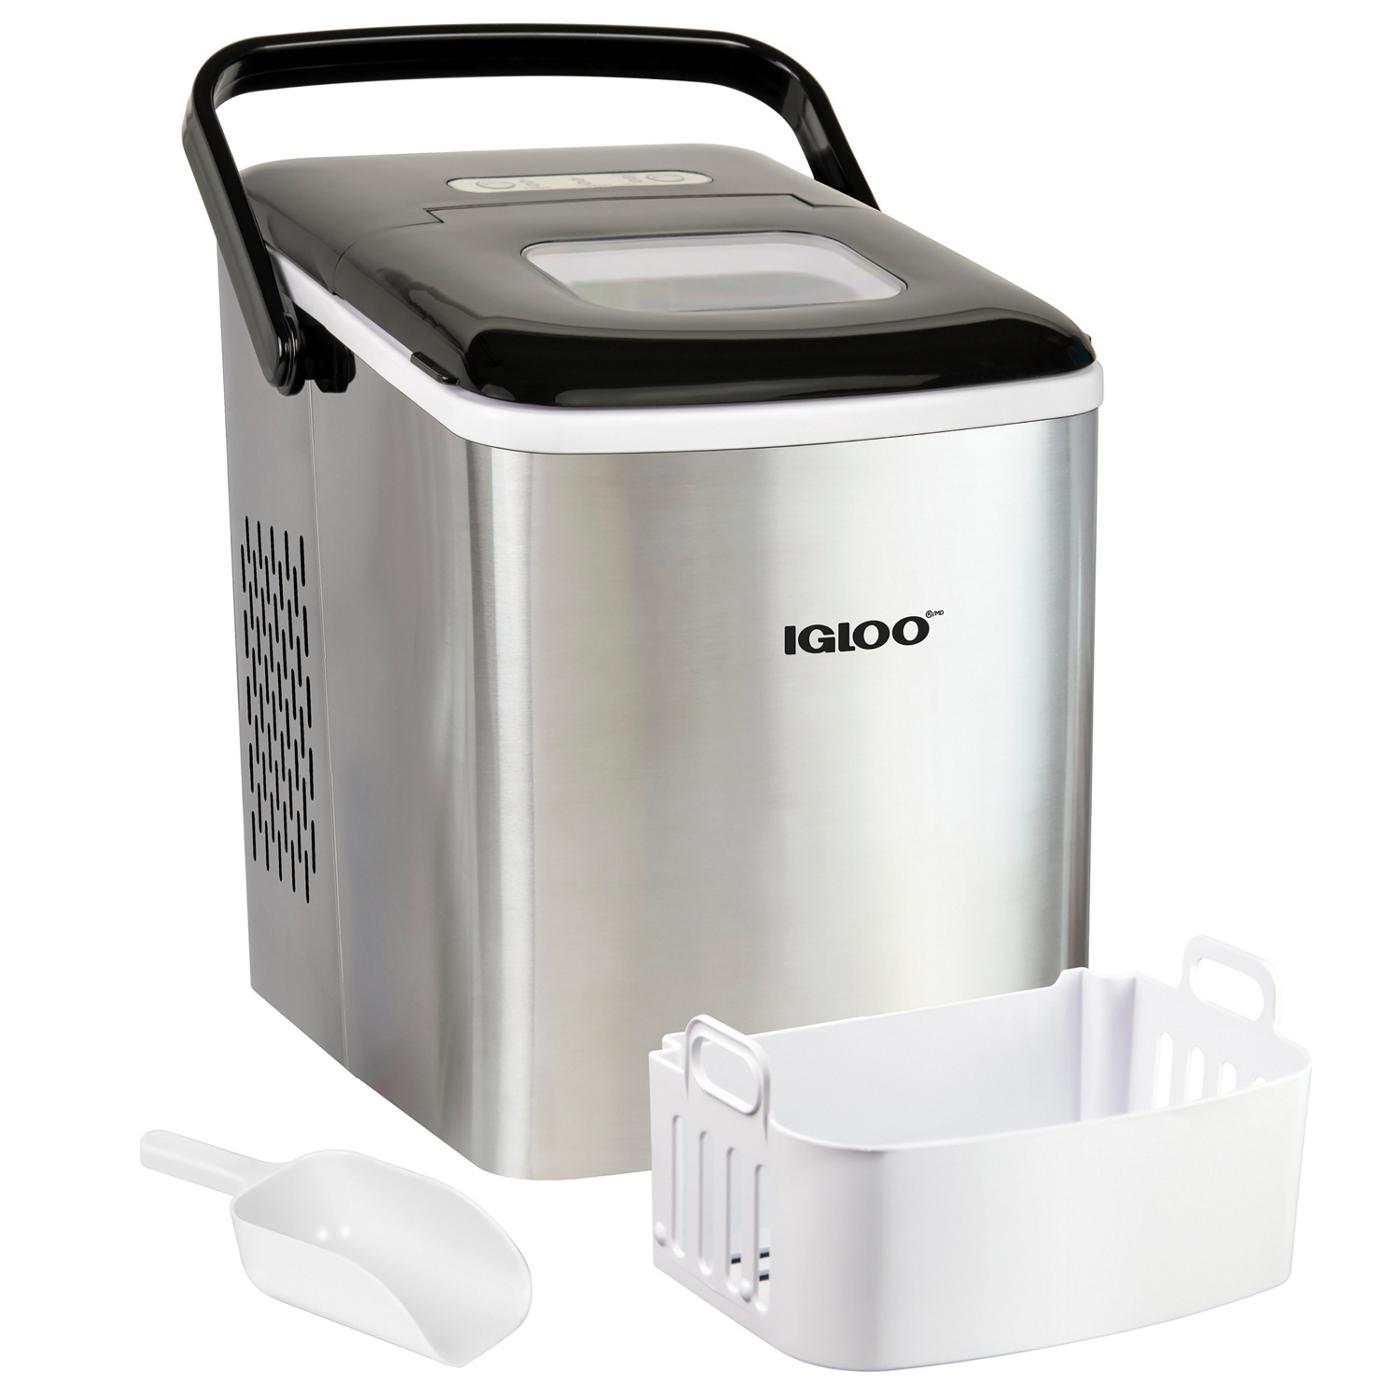 Igloo Self Cleaning Ice Maker with Carrying Handle; image 6 of 6